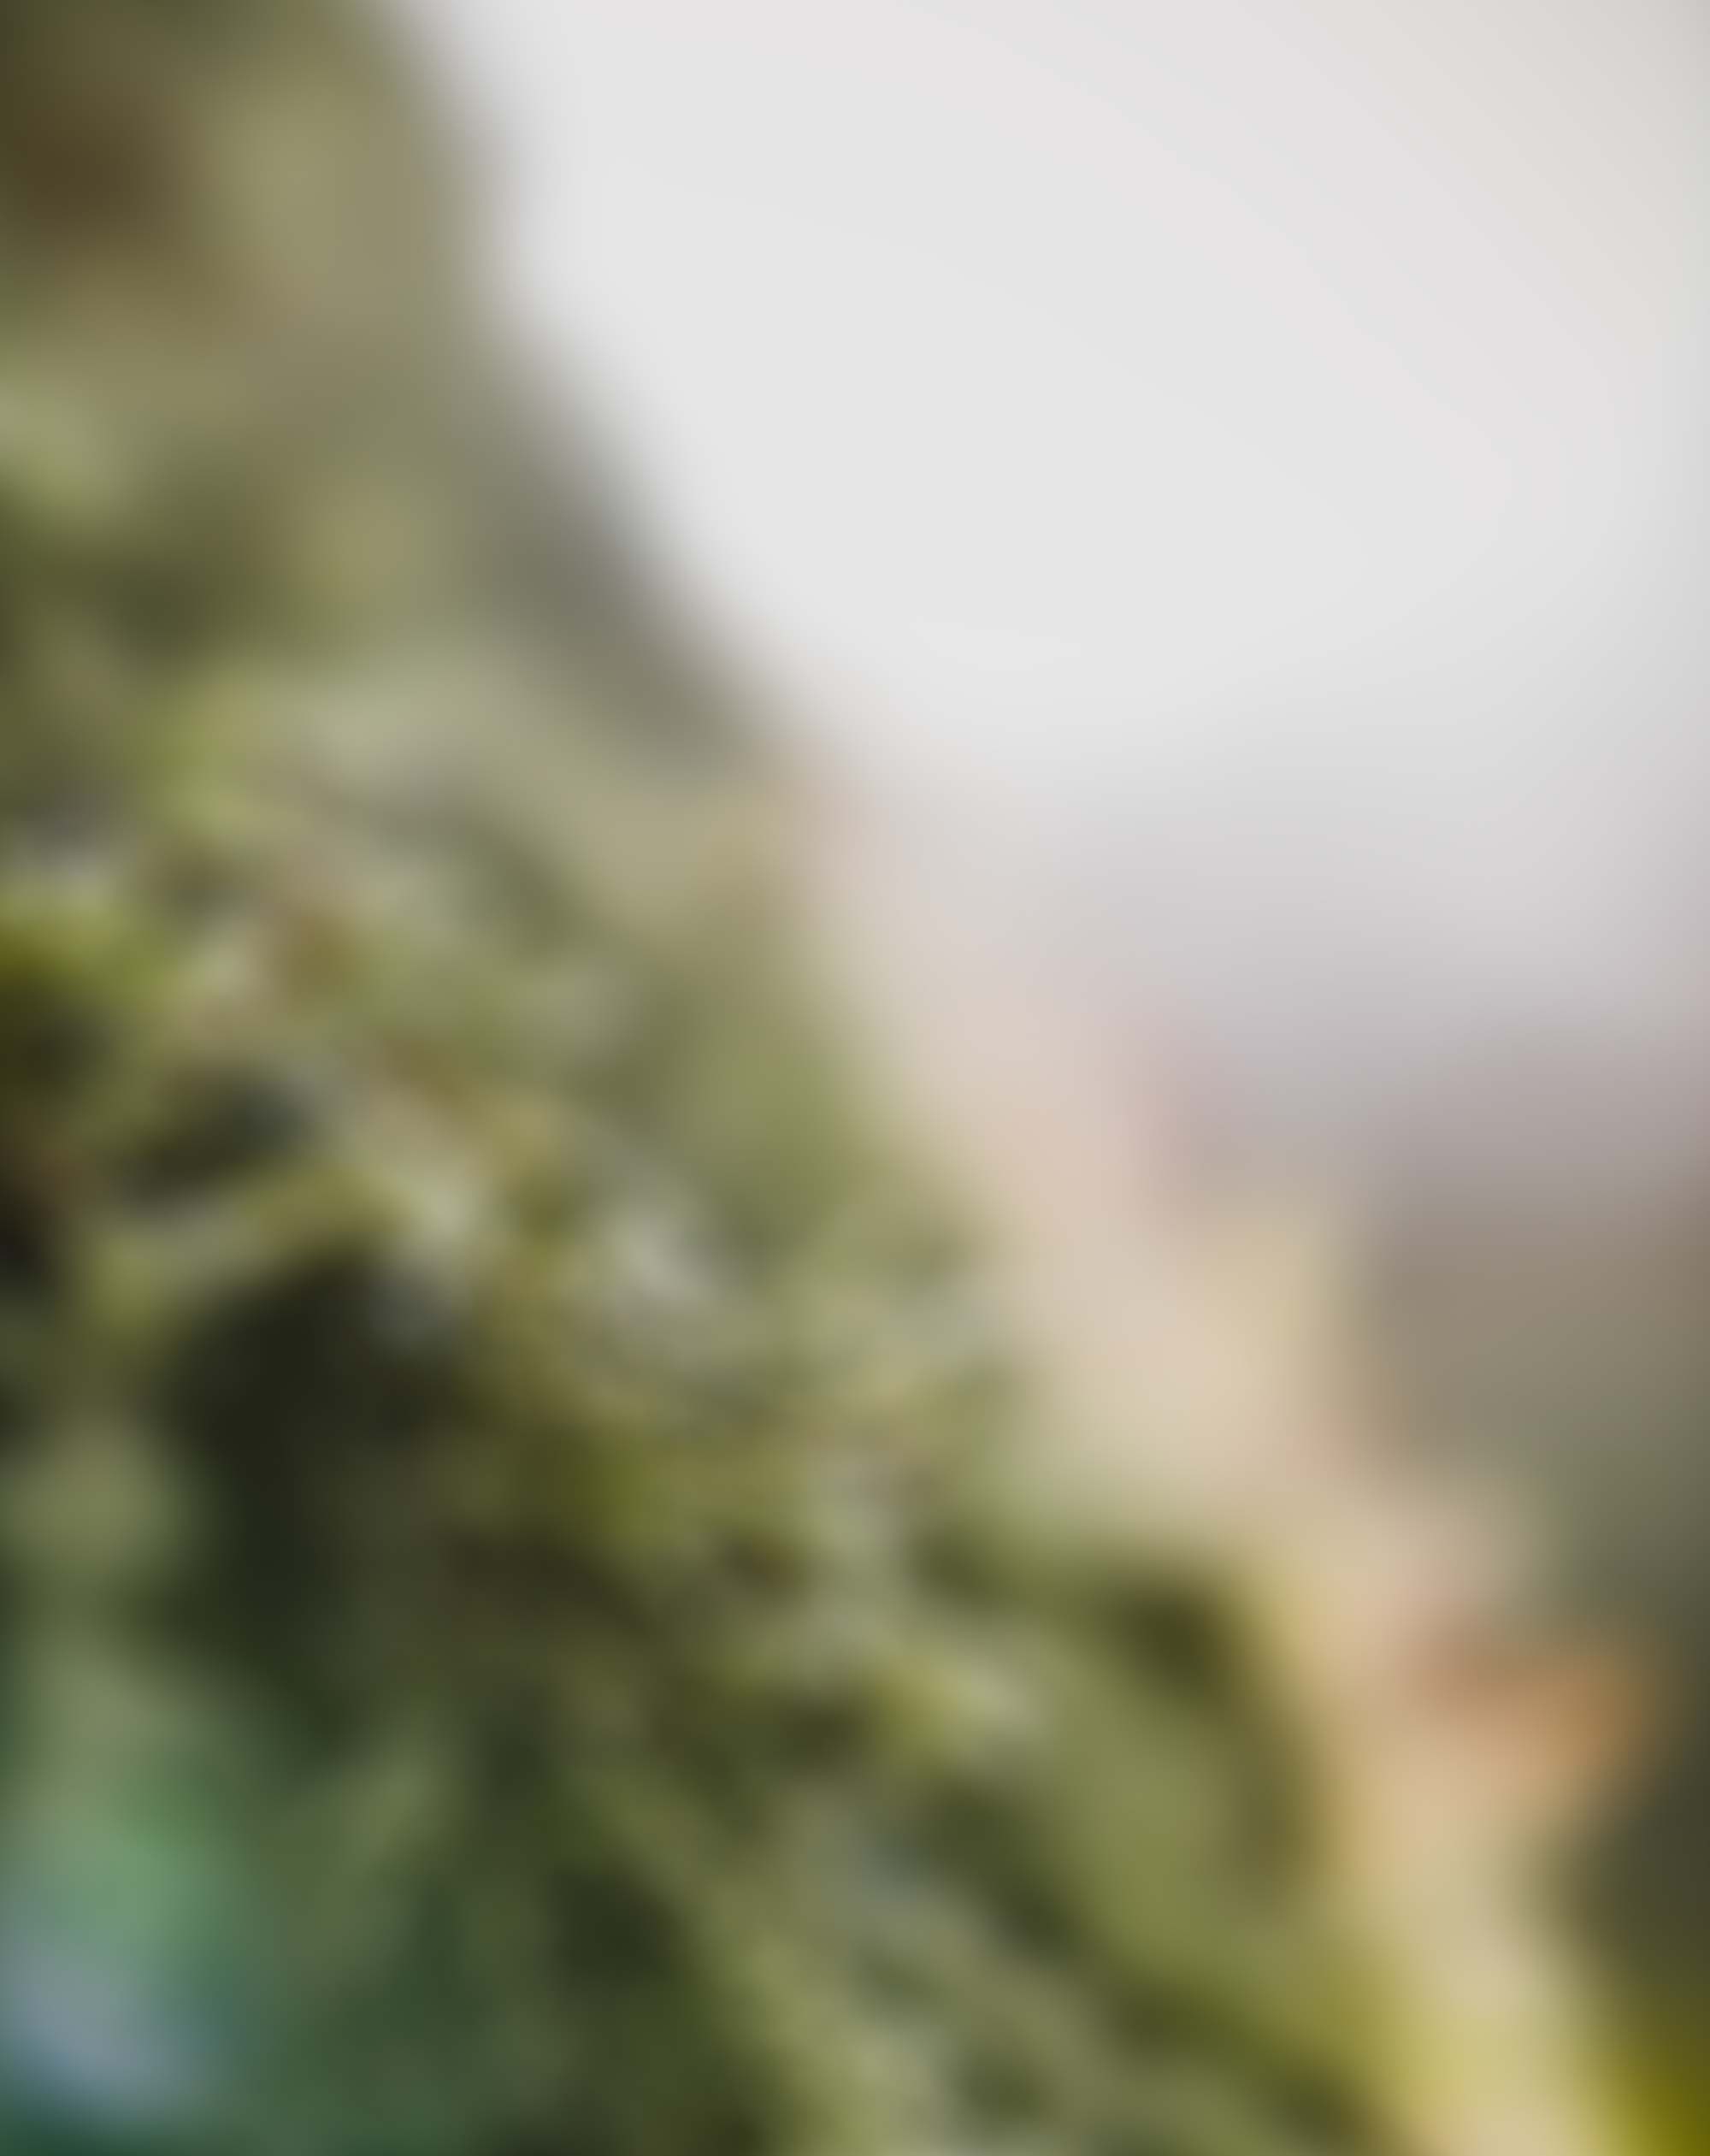 New Awesome Blur Background Free Stock Image [ Download ]